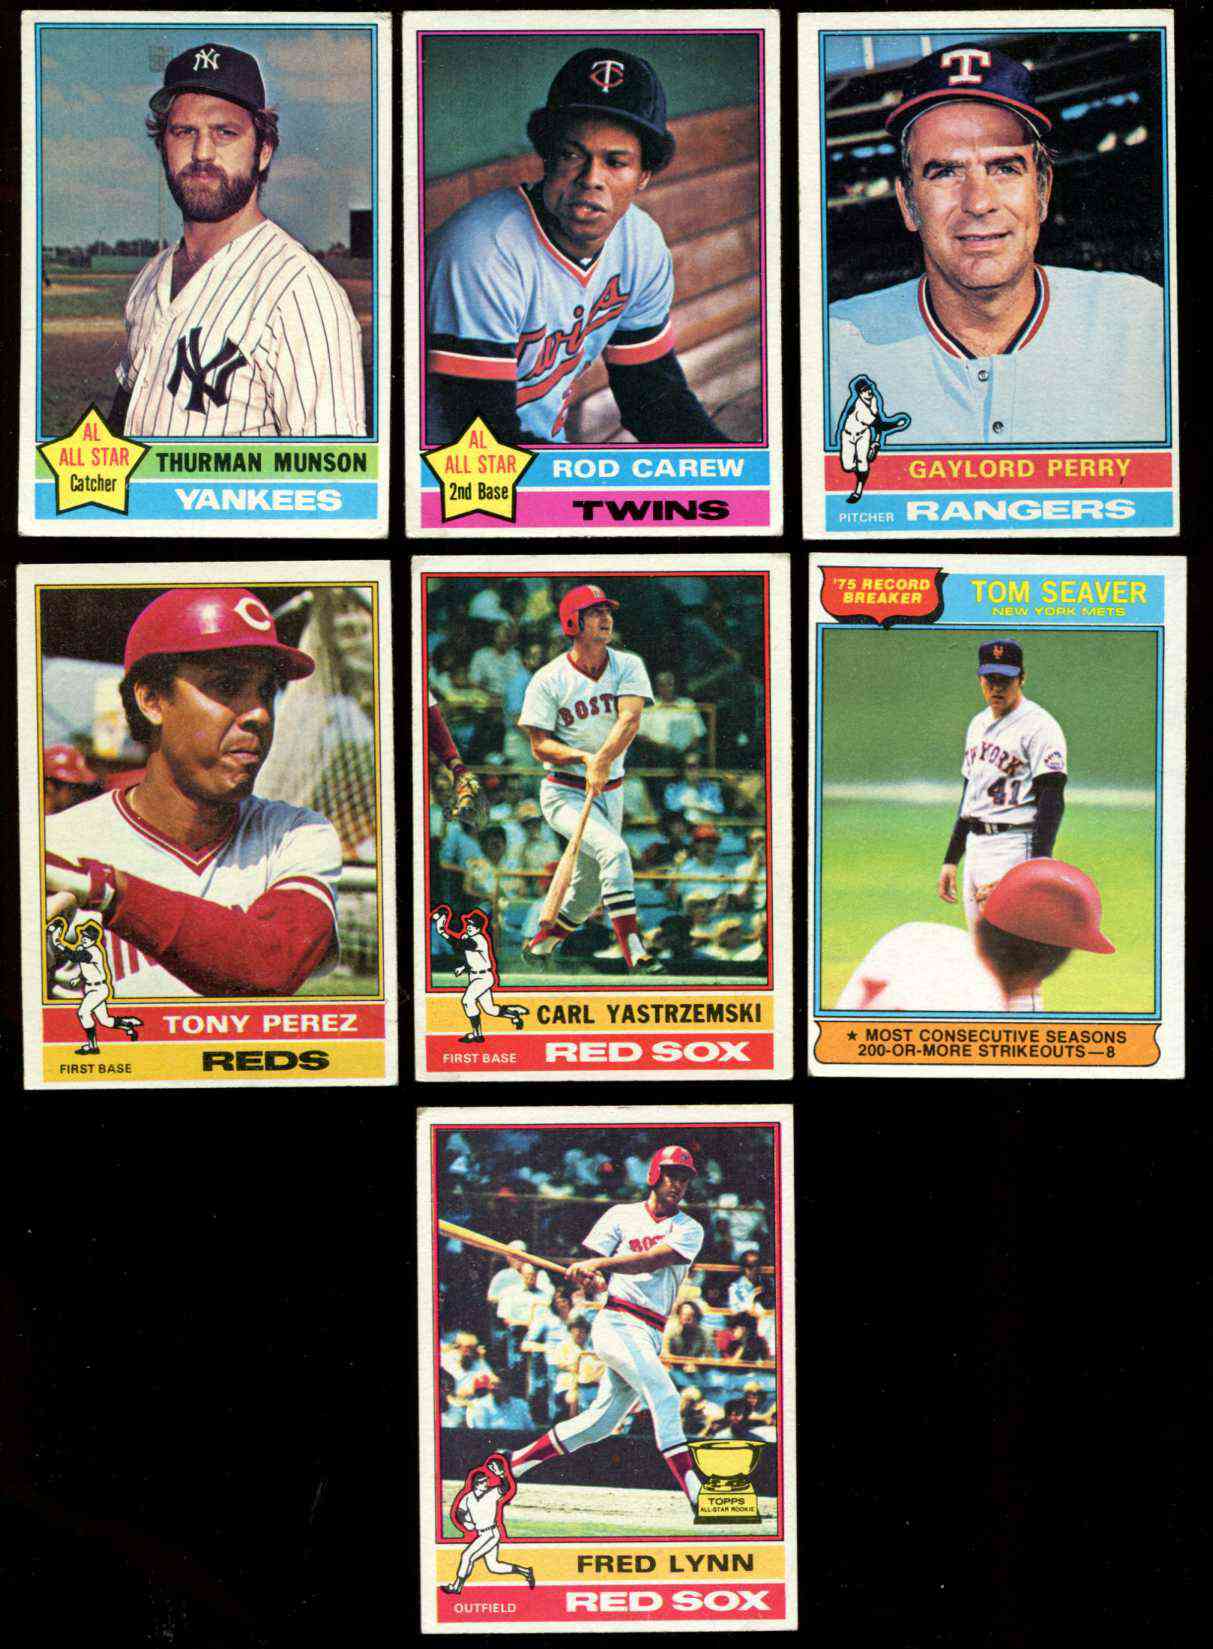 Manny Sanguillen / Bill Madlock / Ted Simmons Unsigned 1976 Topps No.151  Pittsburgh Pirates Baseball Card